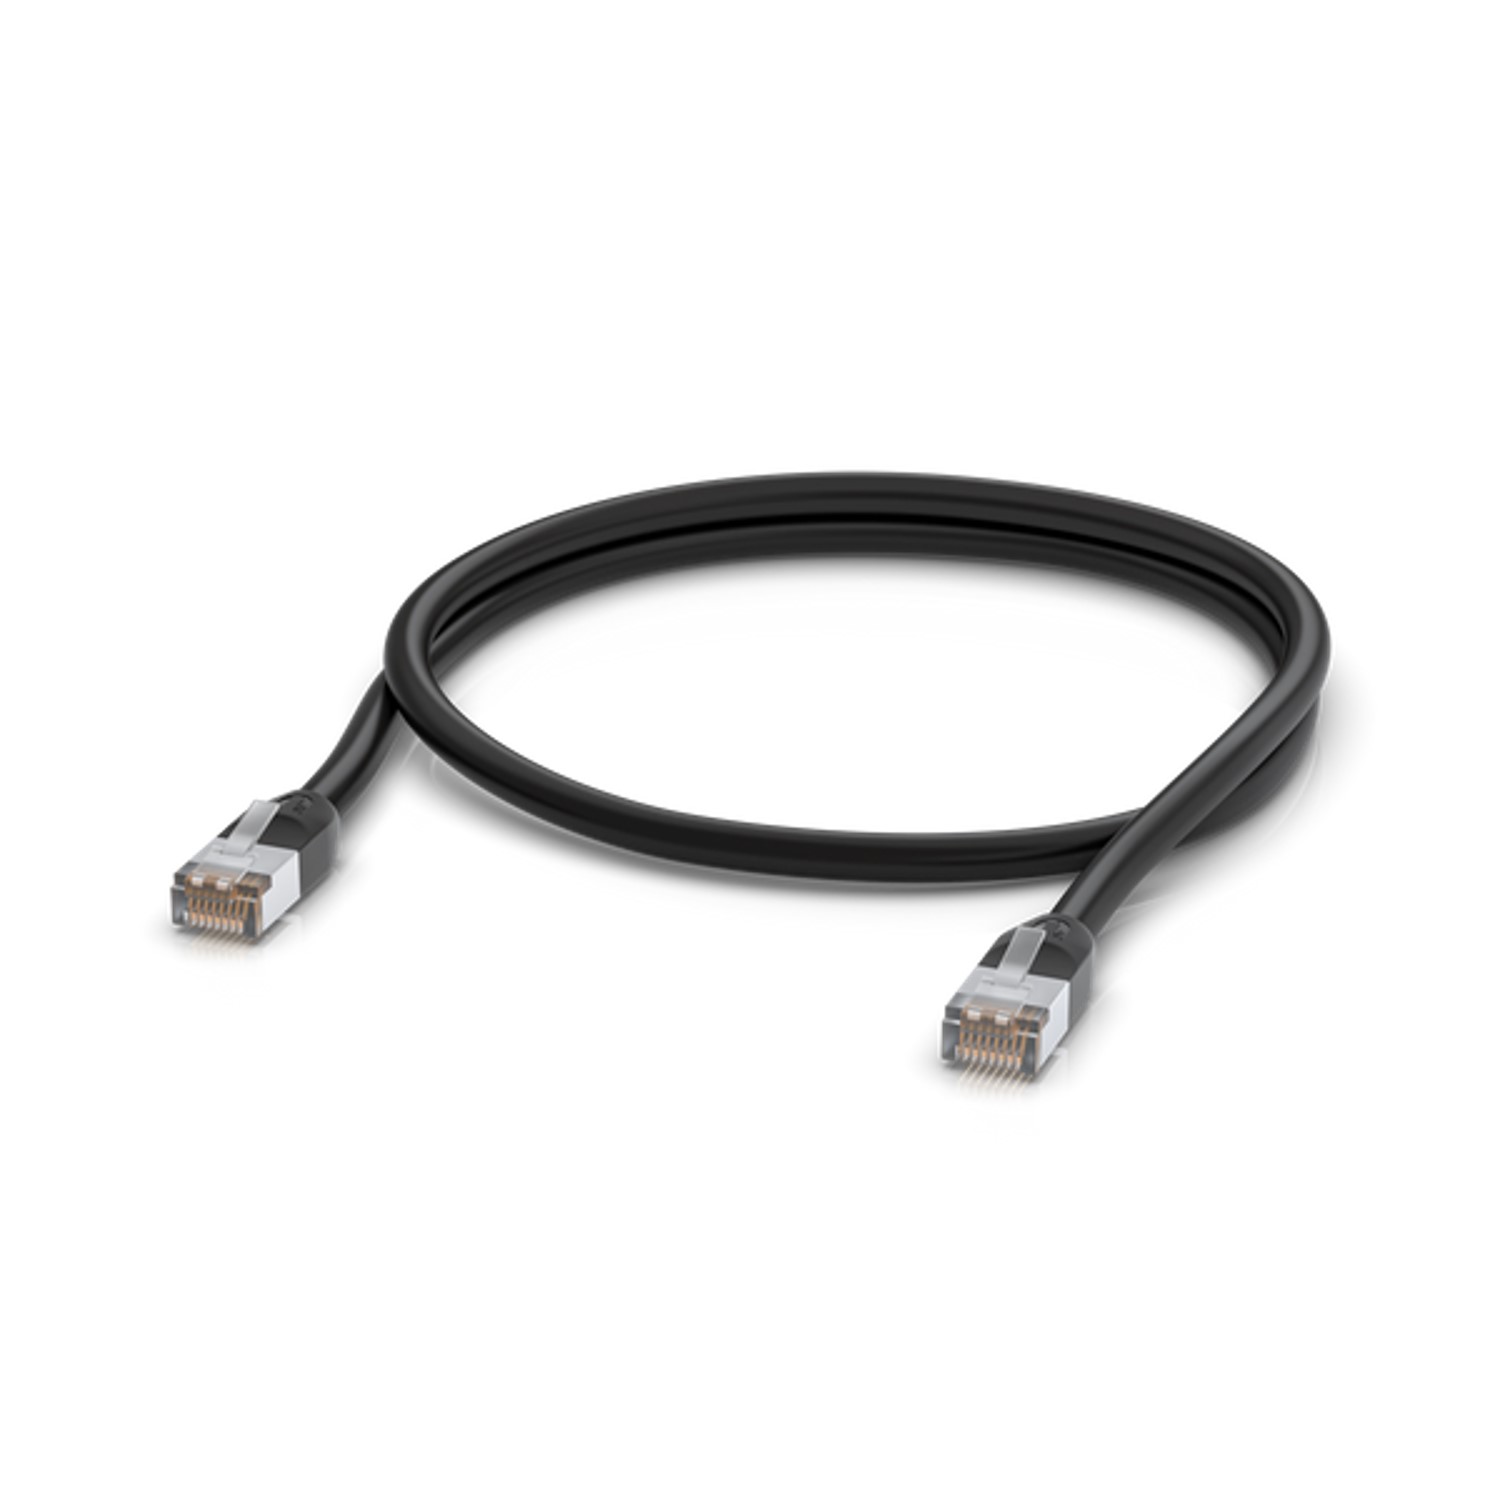 UACC-Cable-Patch-Outdoor-1M-BK | 1m Grounded, External CAT5e